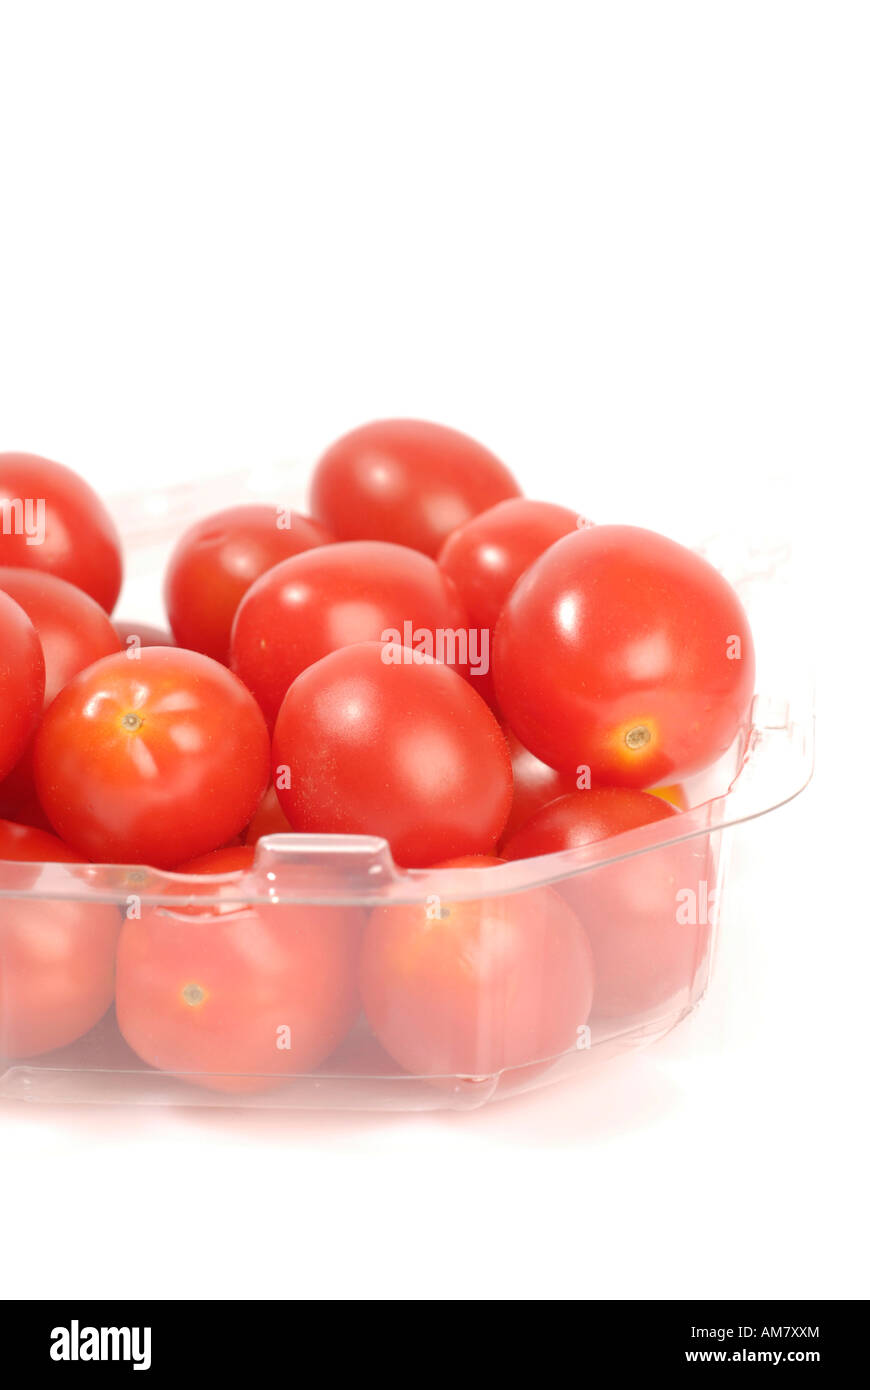 Tomatoes in plastic wrapping Stock Photo